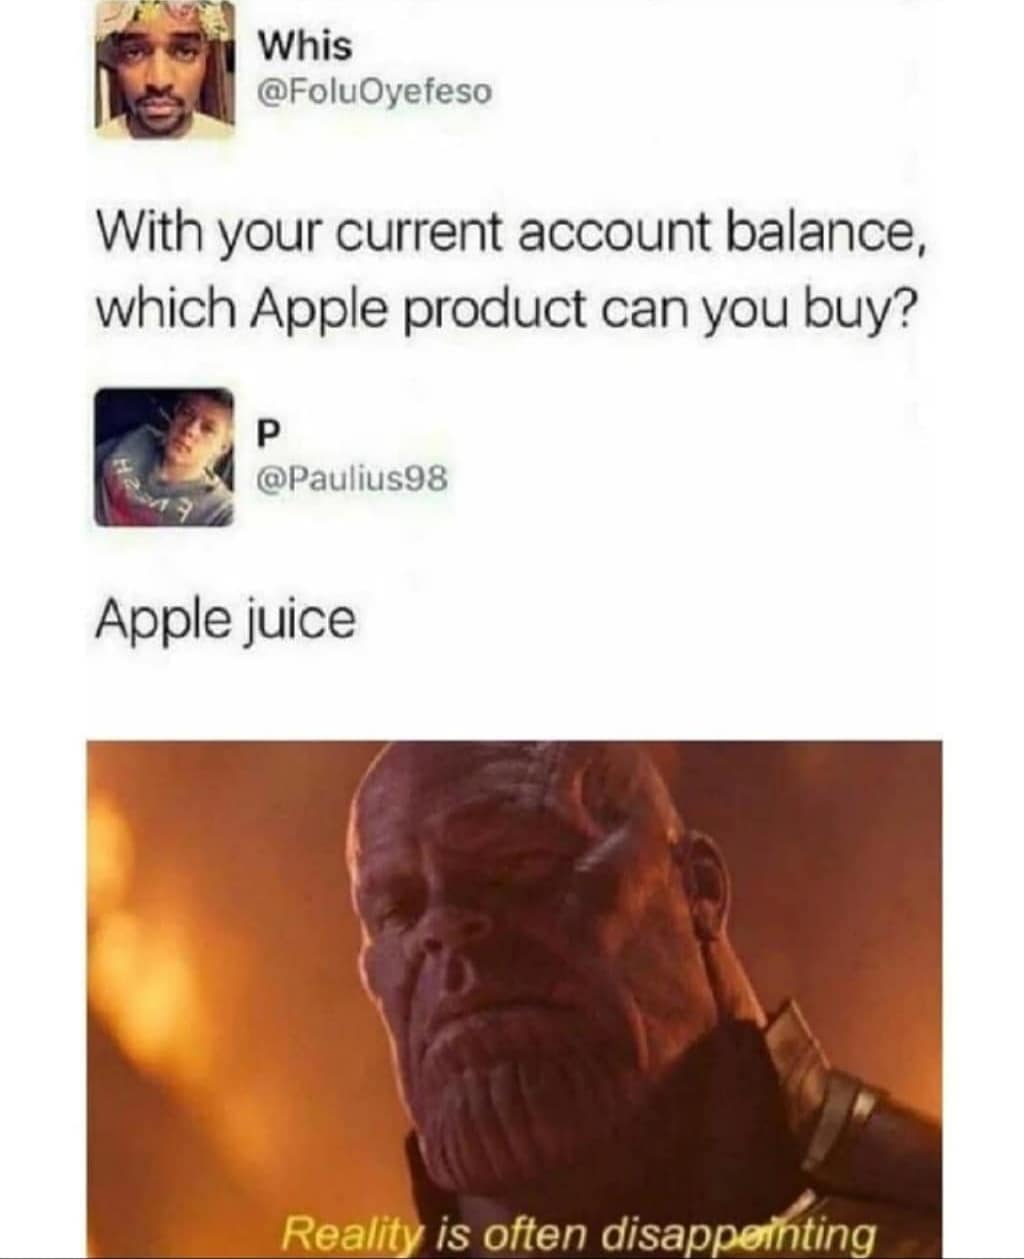 you current account balance which apple product - Whis With your current account balance, which Apple product can you buy? P Apple juice Reality is often disappeinting